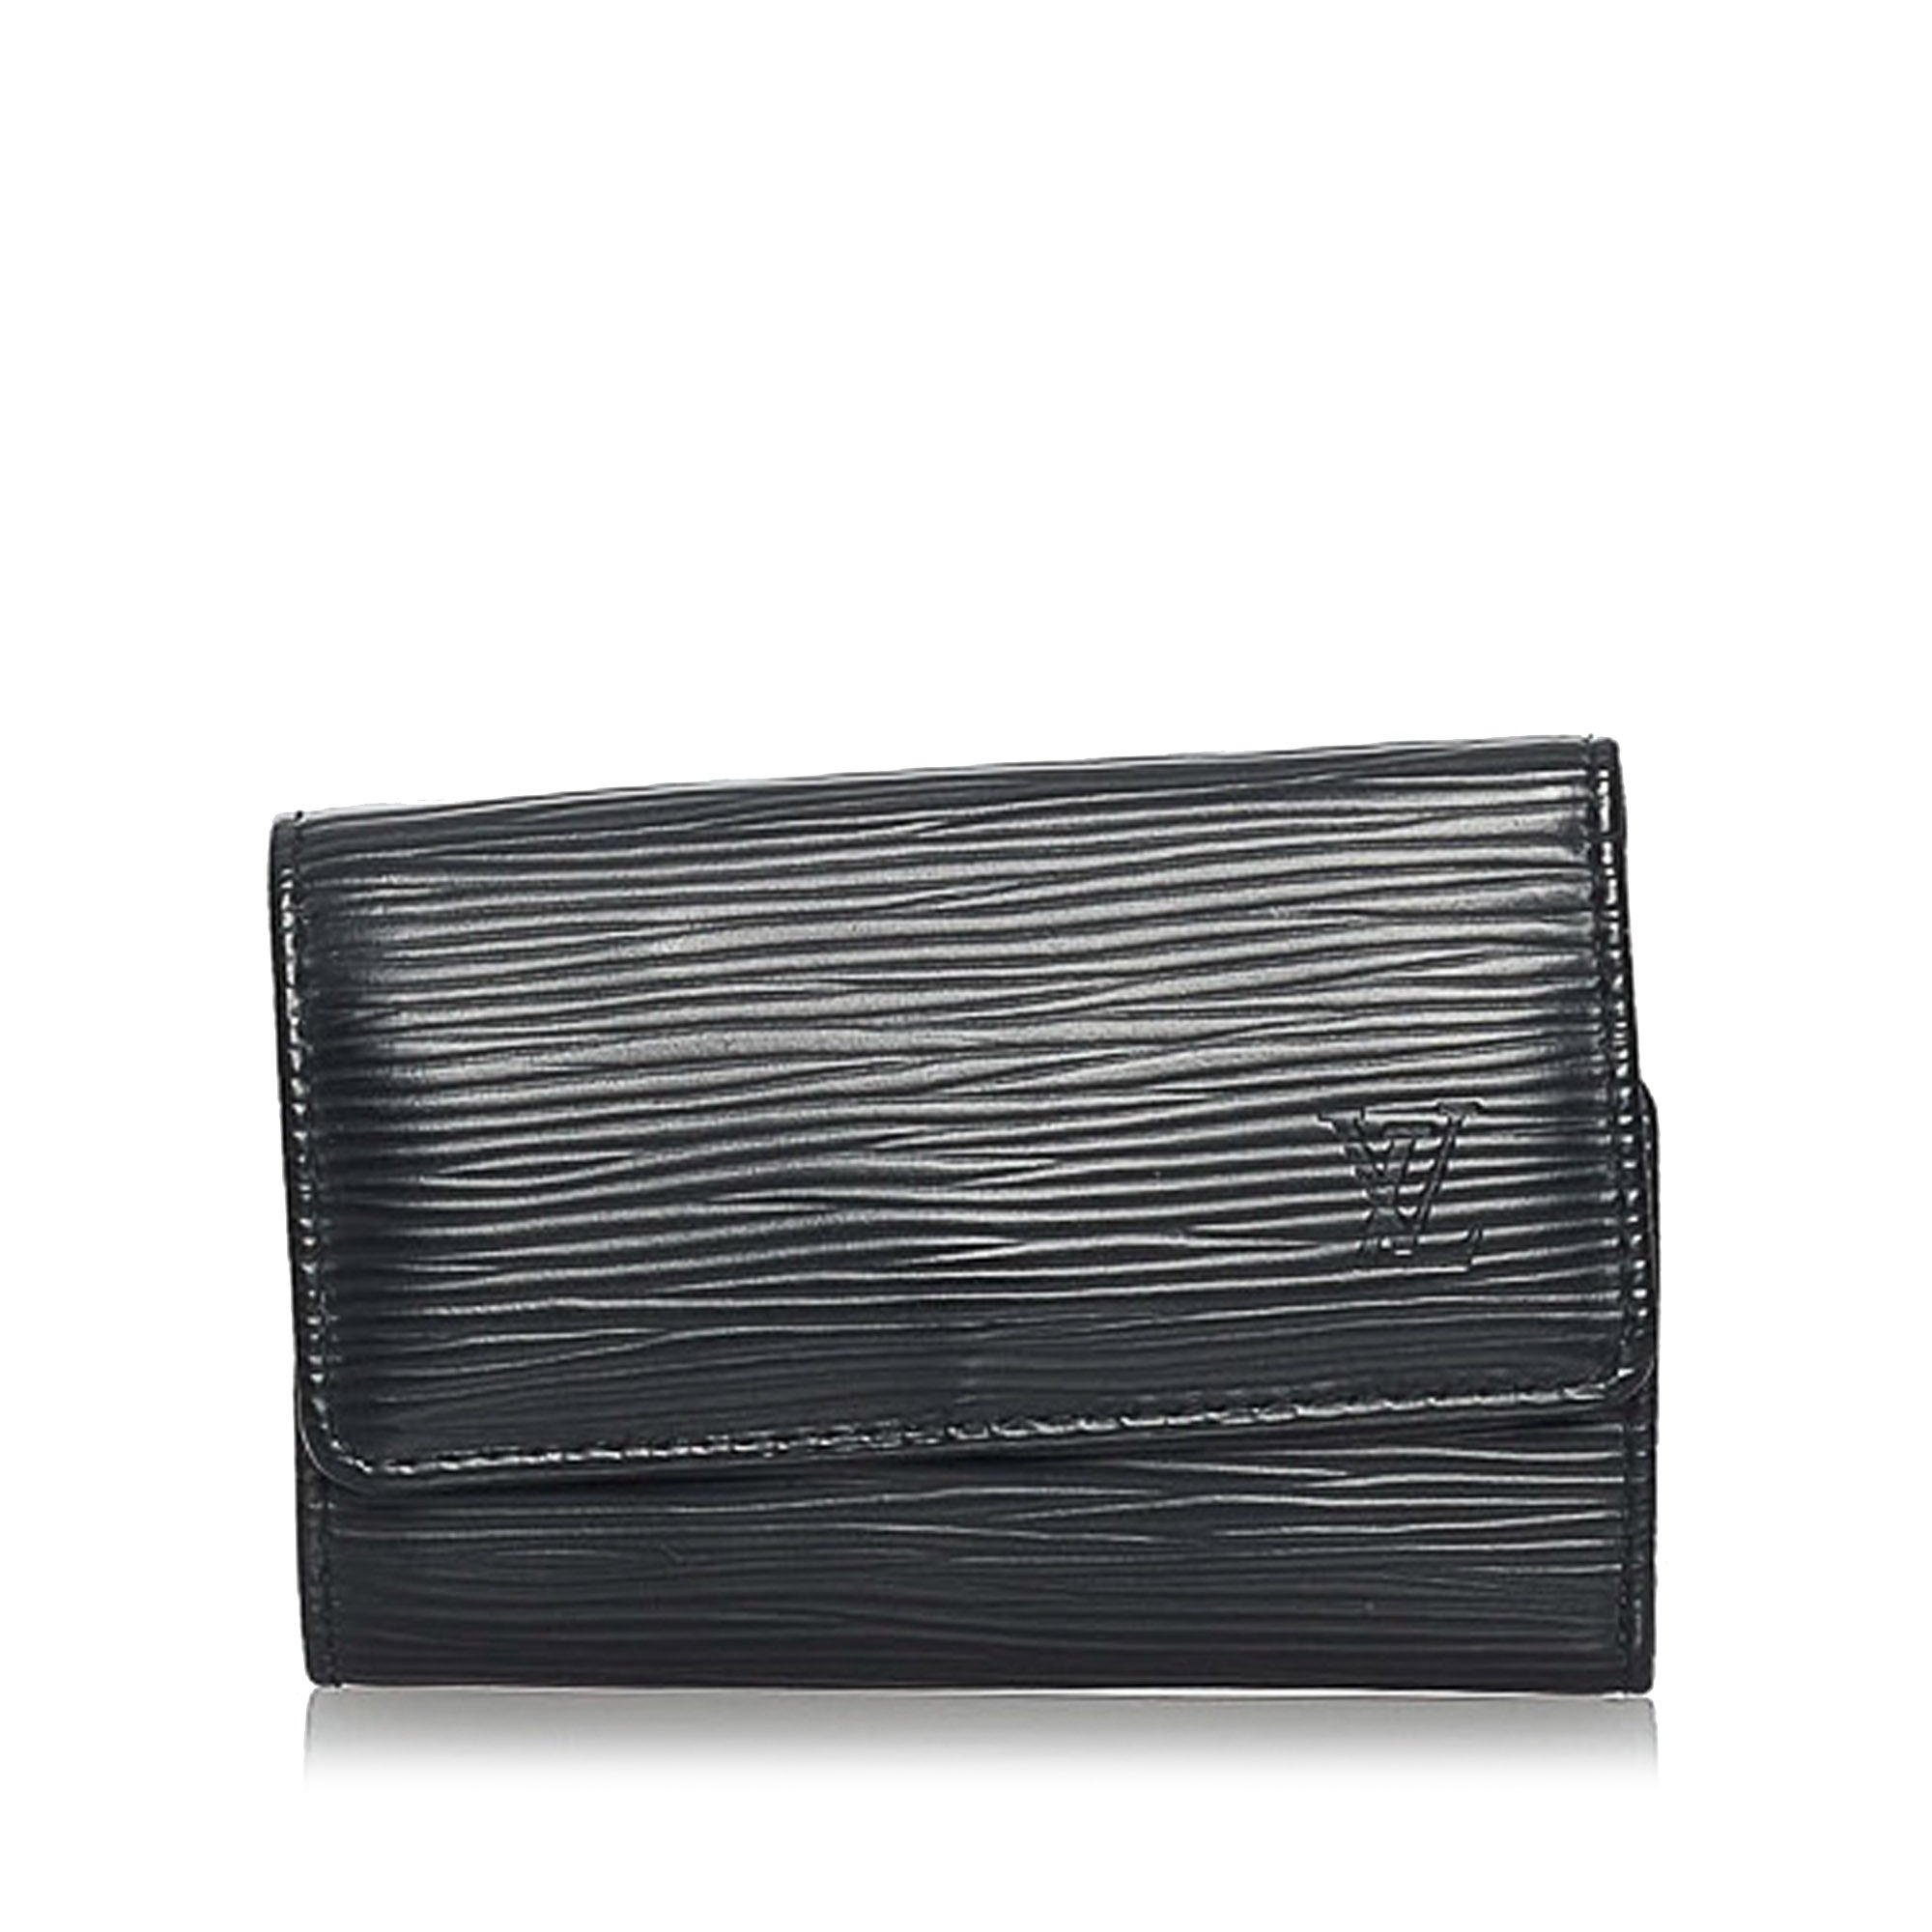 Epi Leather Wallet, Neon Men's Small Leather Goods